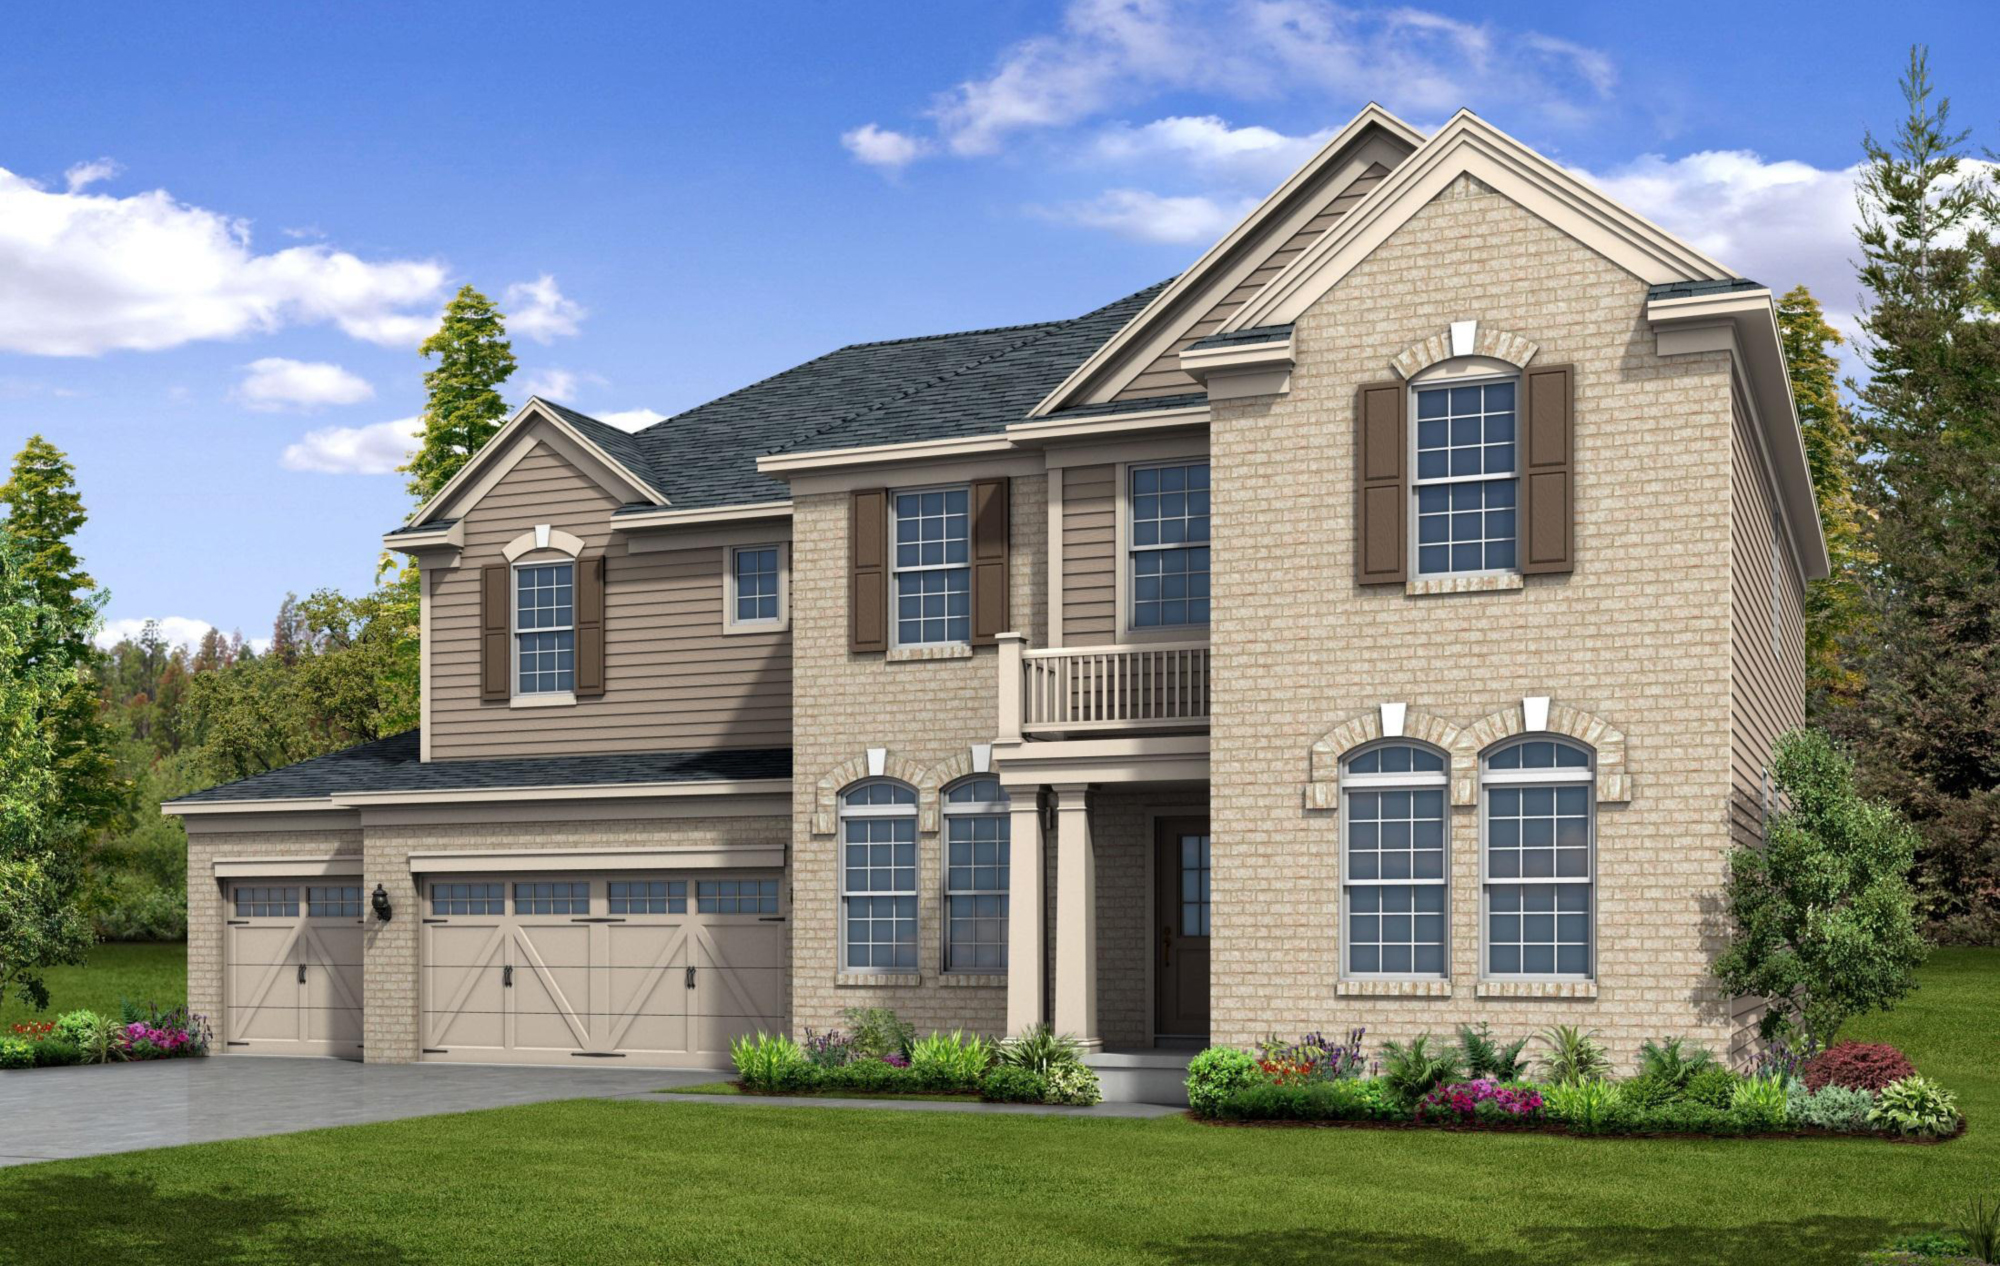 The new subdivision will be located in Carmel’s far northwest corner. (Submitted rendering)